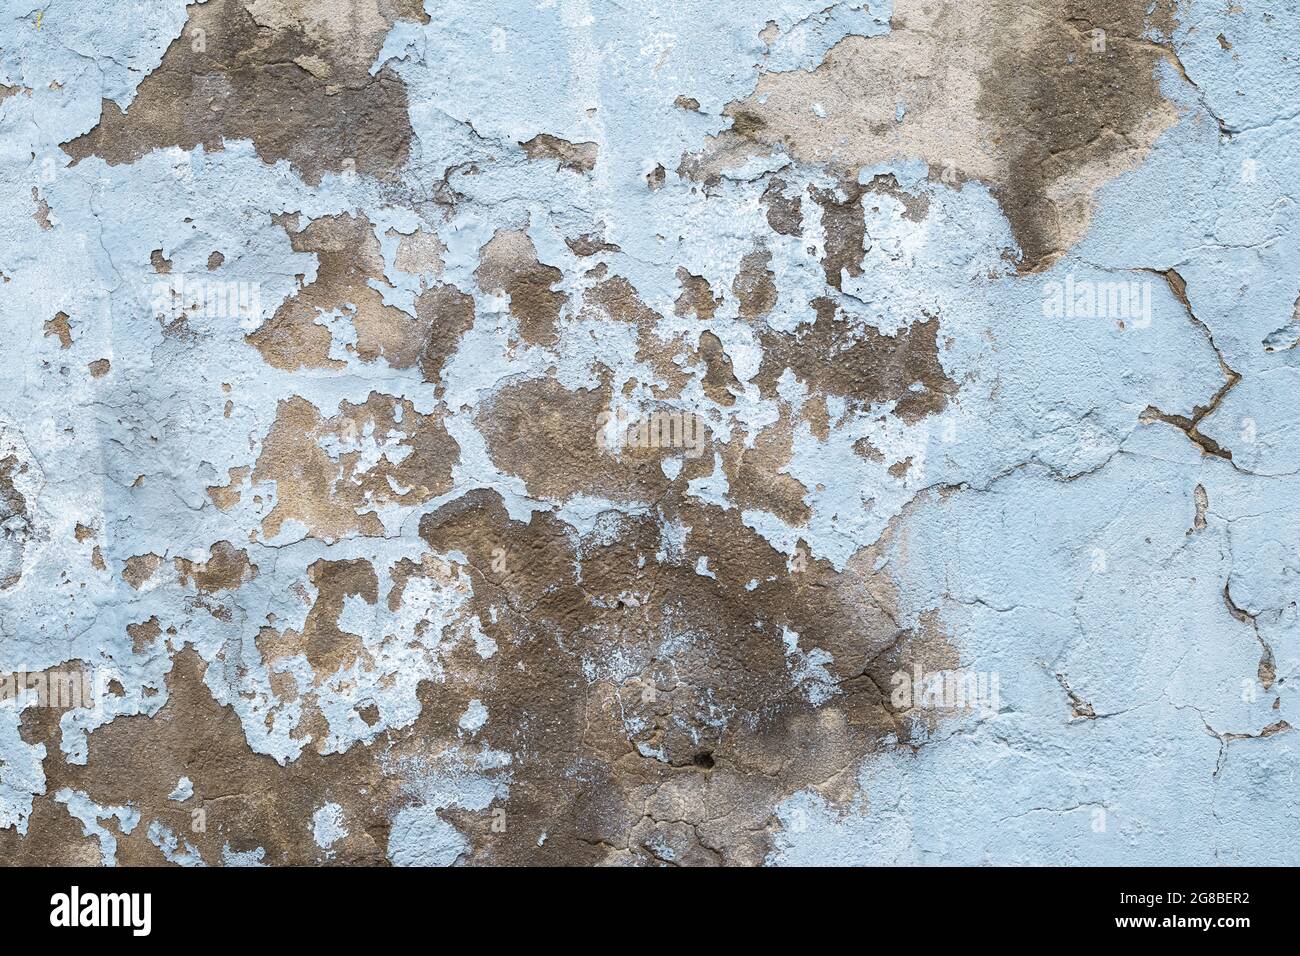 Old concrete wall with peeling paint. Close-up of blue ruined cement wall. Abstract grunge stucco texture. Cracked surface of plaster Stock Photo